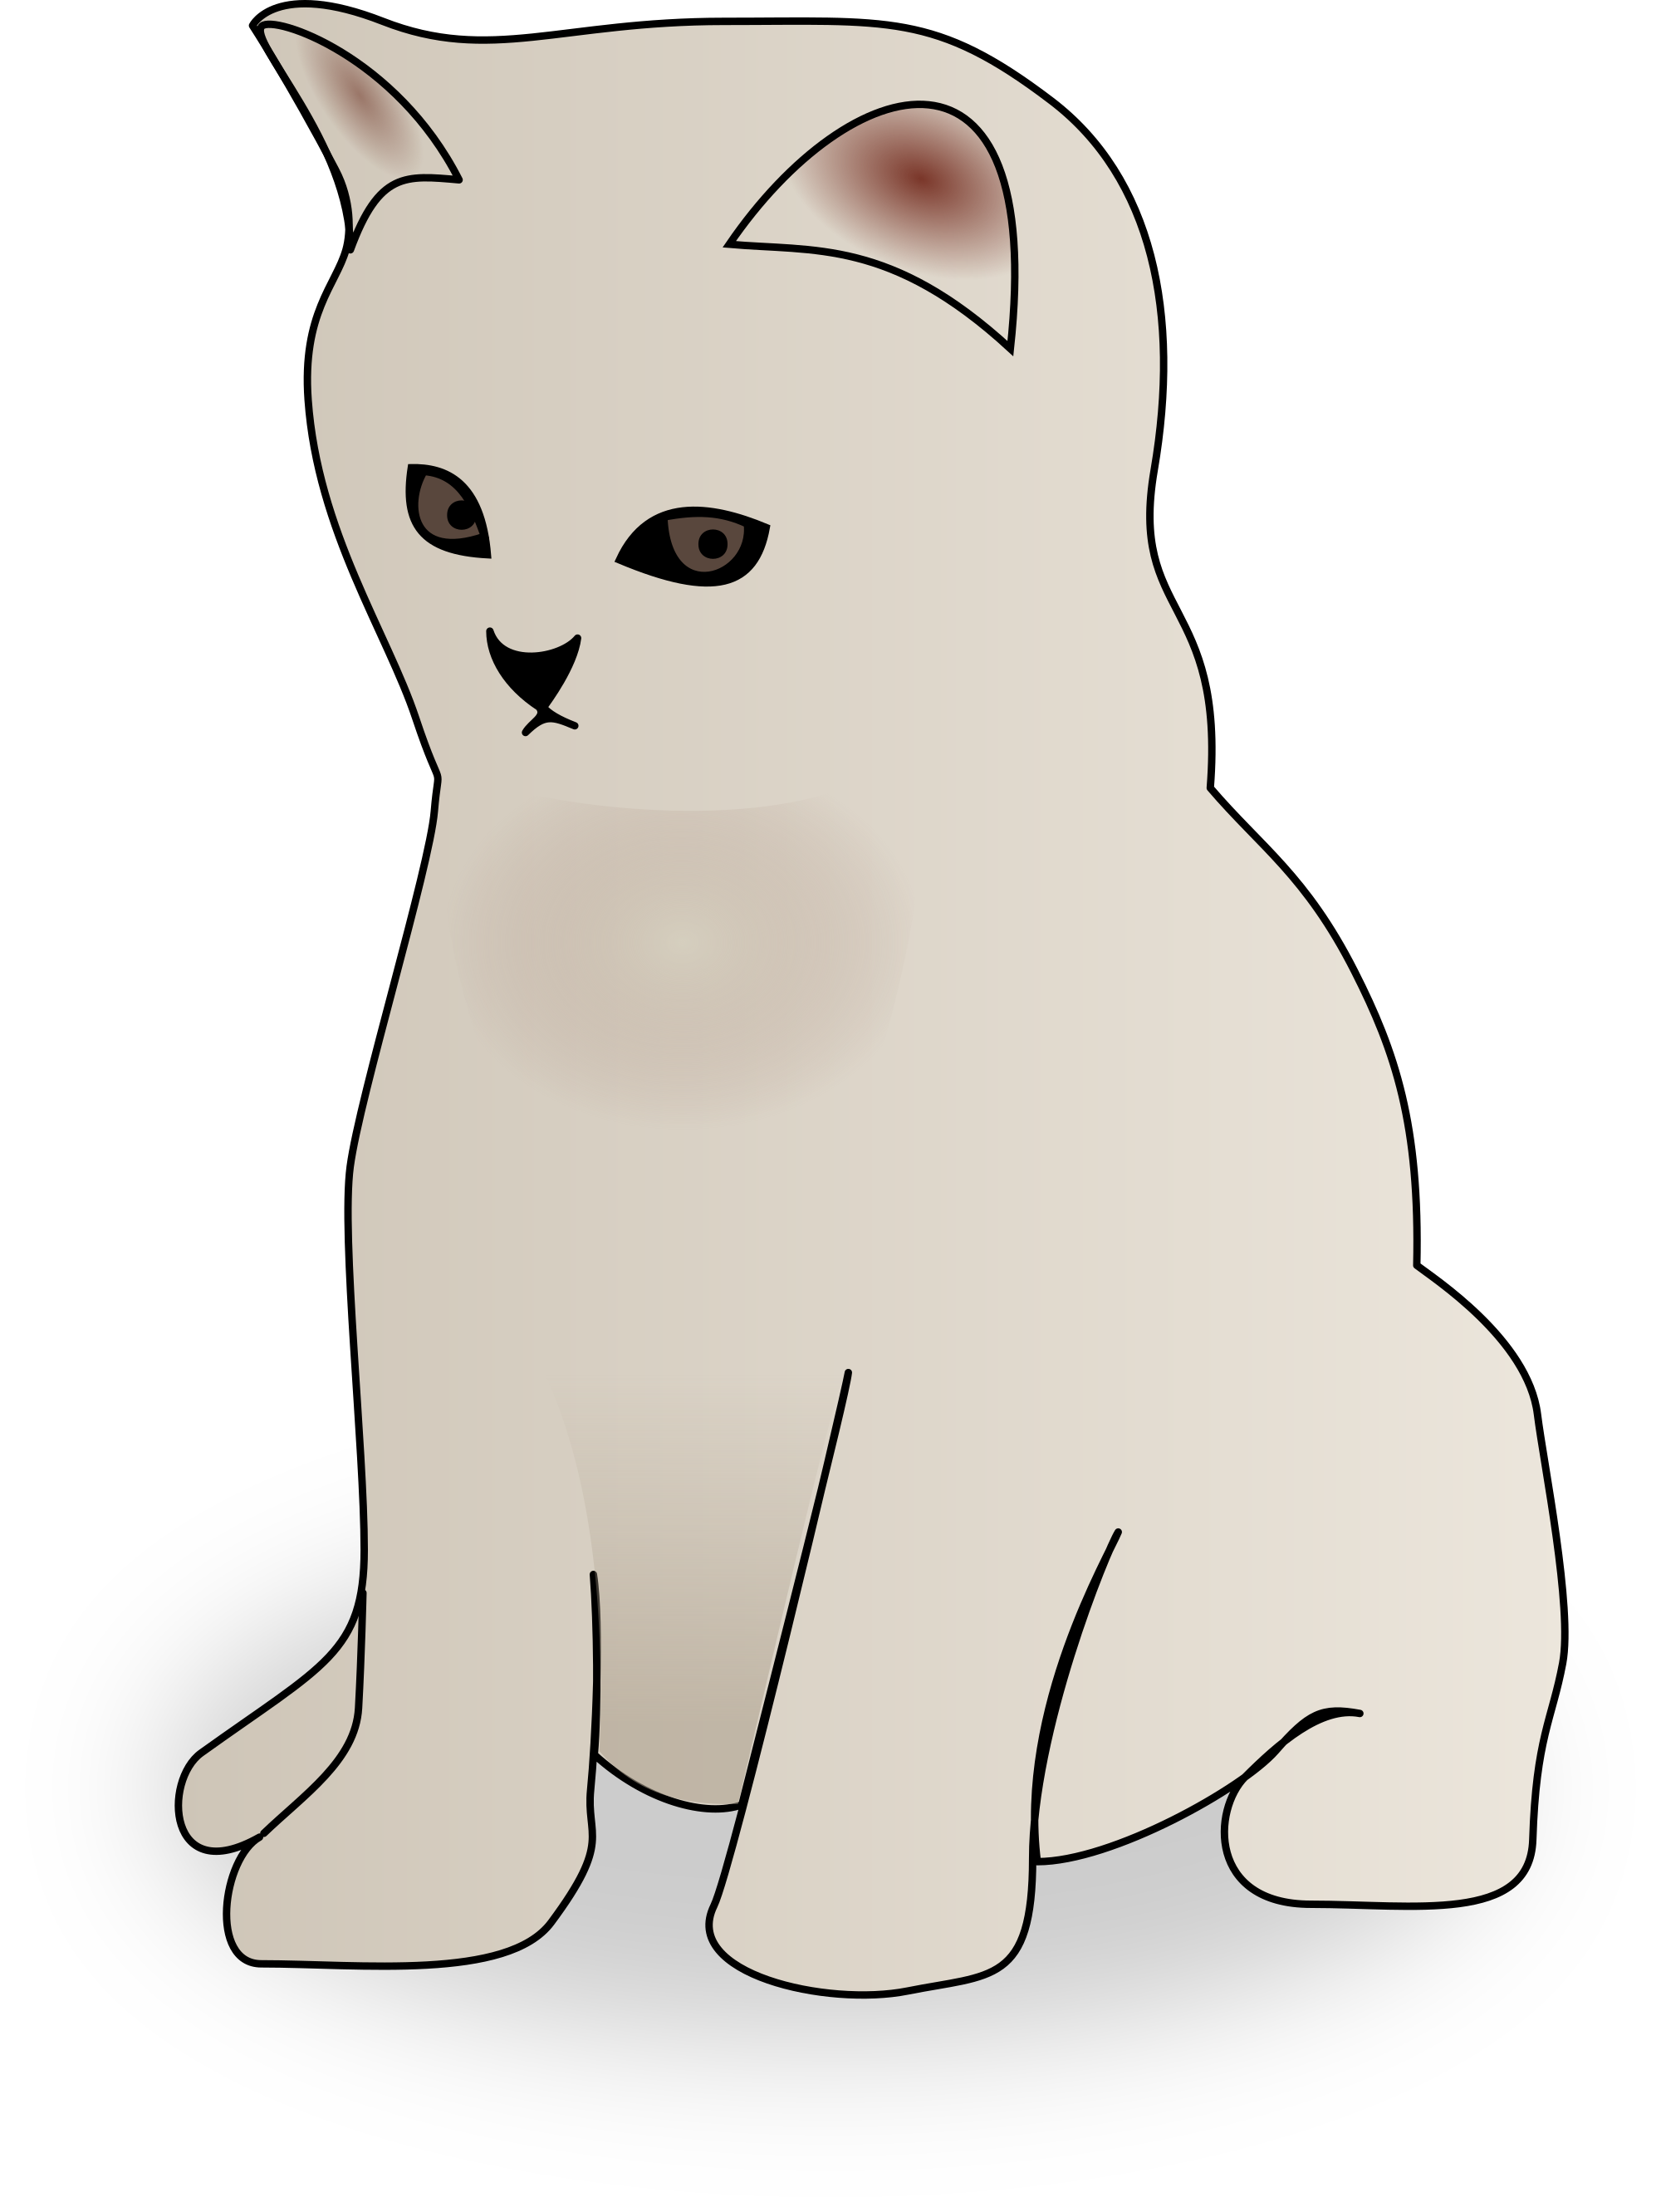 Free kitten thinking clipart clipart and vector image